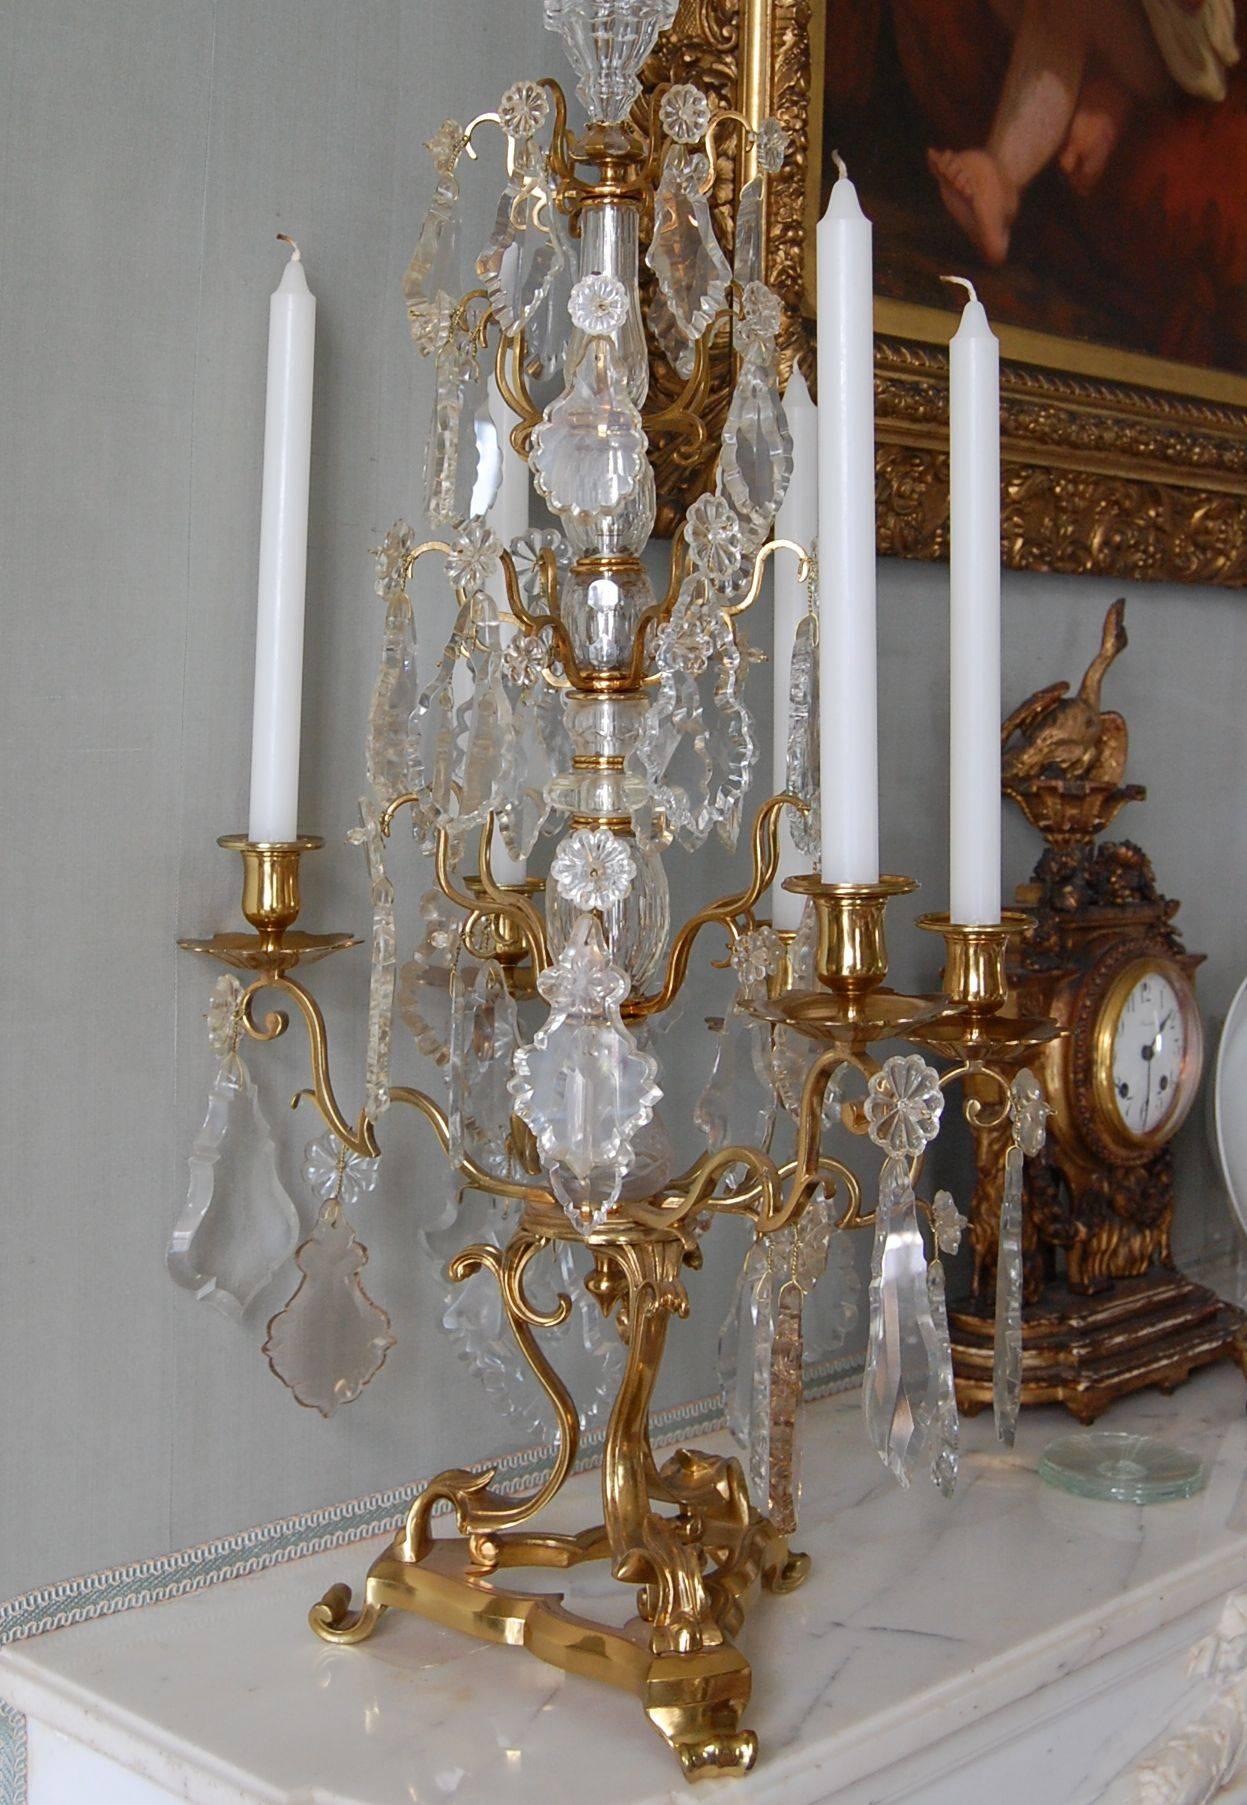 Monumental Pair of Antique French Gilt Bronze and Crystal Girandole Candelabra For Sale 2